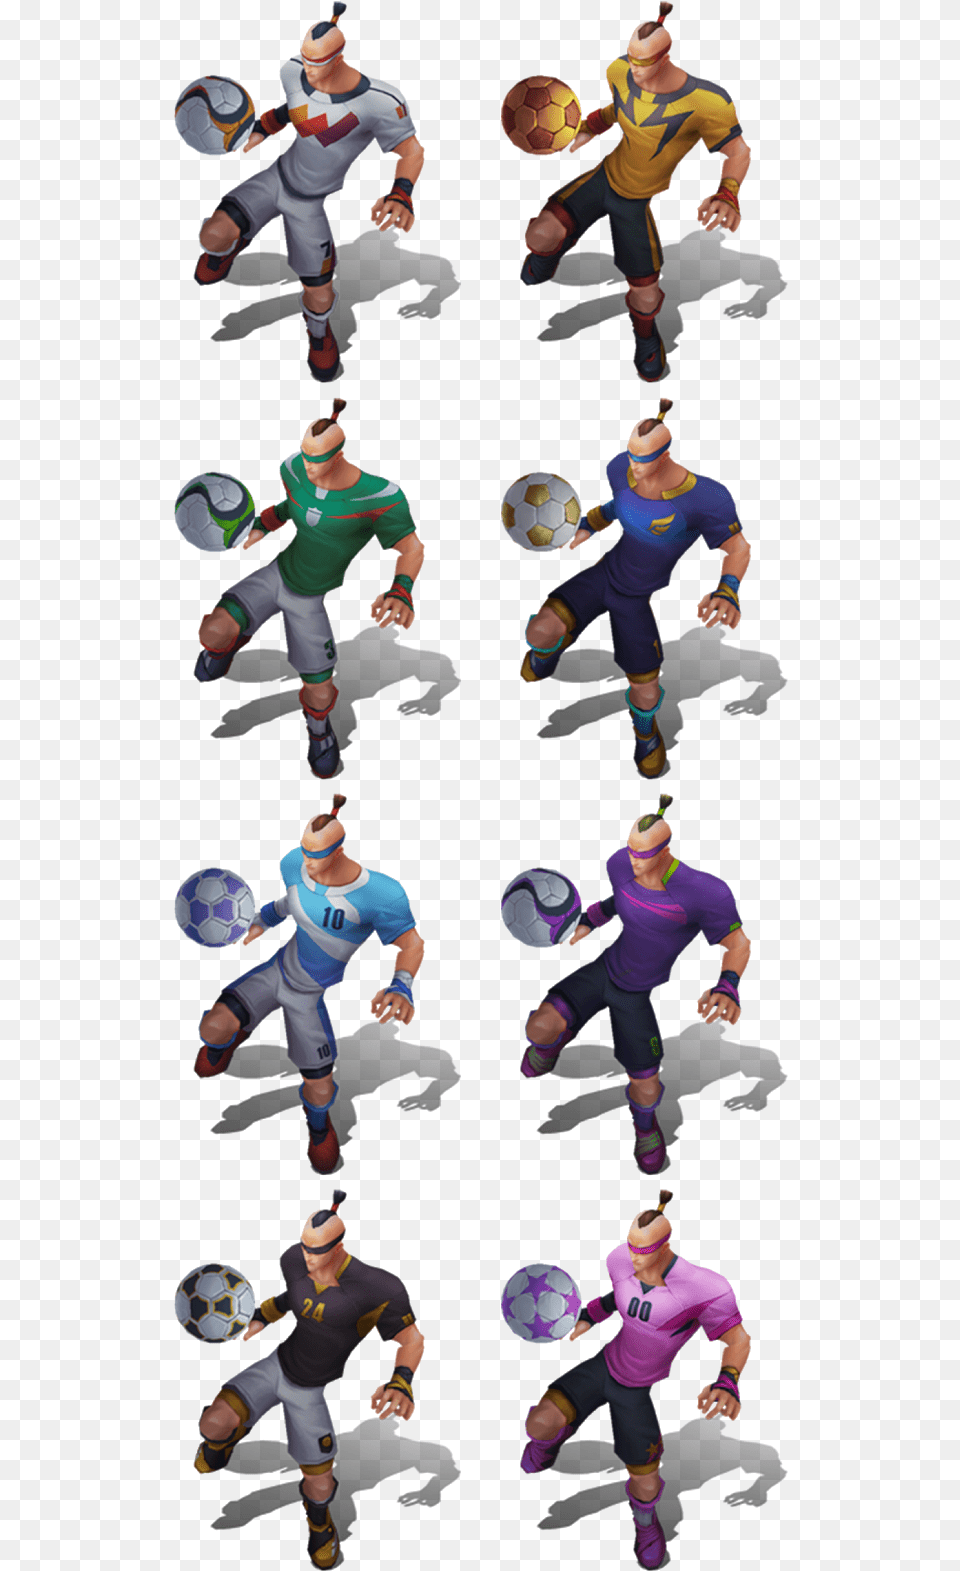 New Summoner Icon Emote For Soccer, Adult, Soccer Ball, Person, Man Png